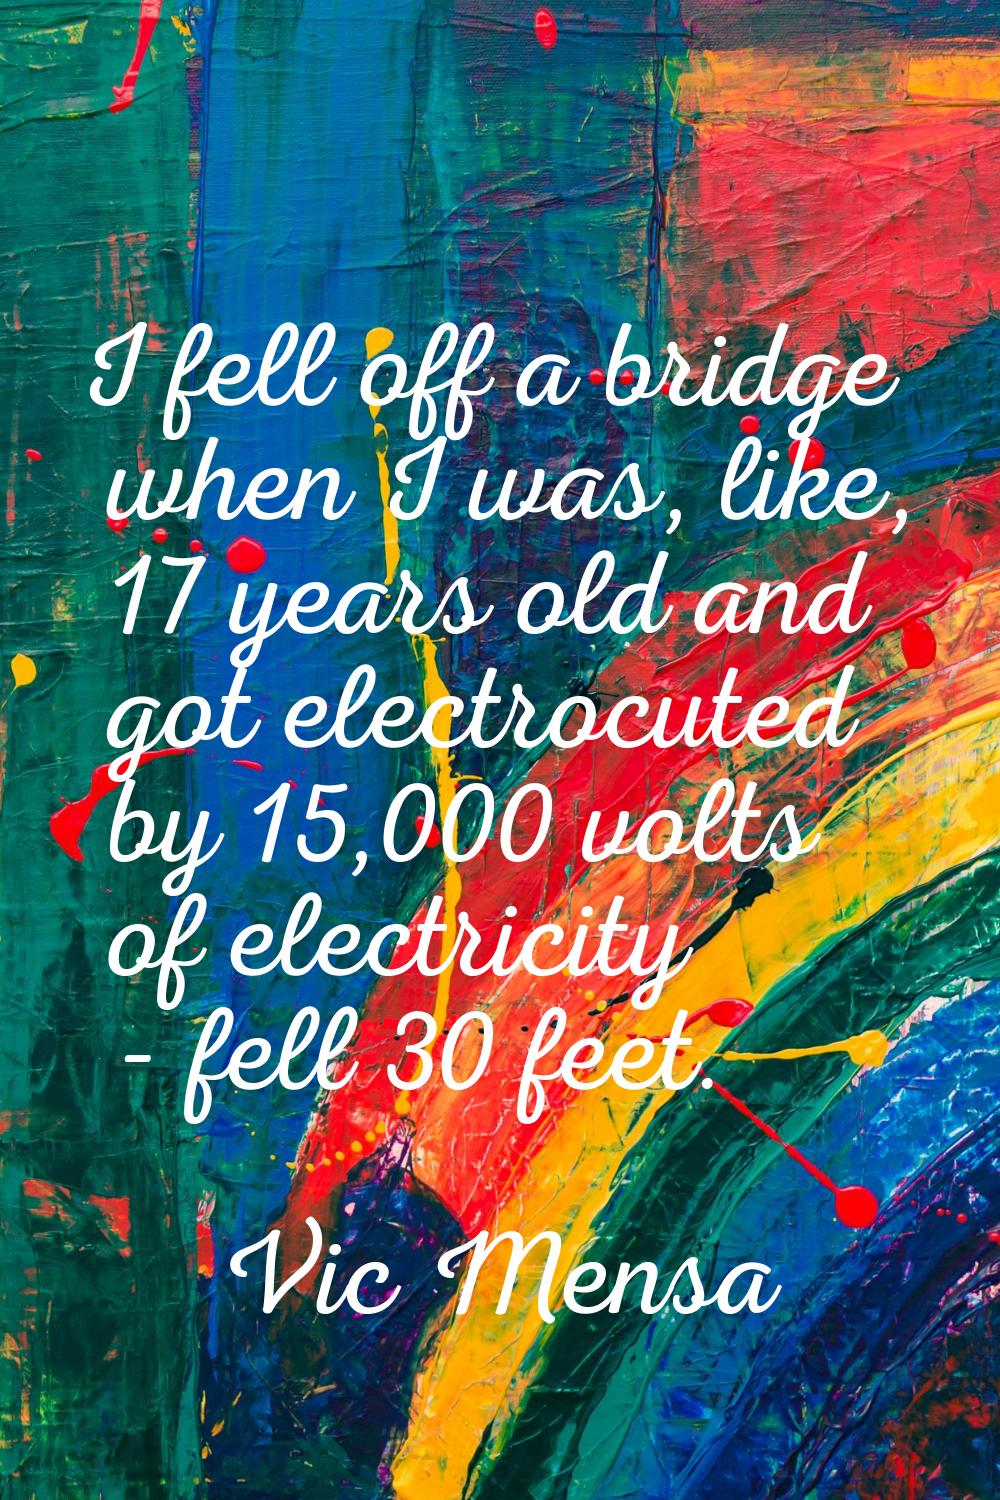 I fell off a bridge when I was, like, 17 years old and got electrocuted by 15,000 volts of electric